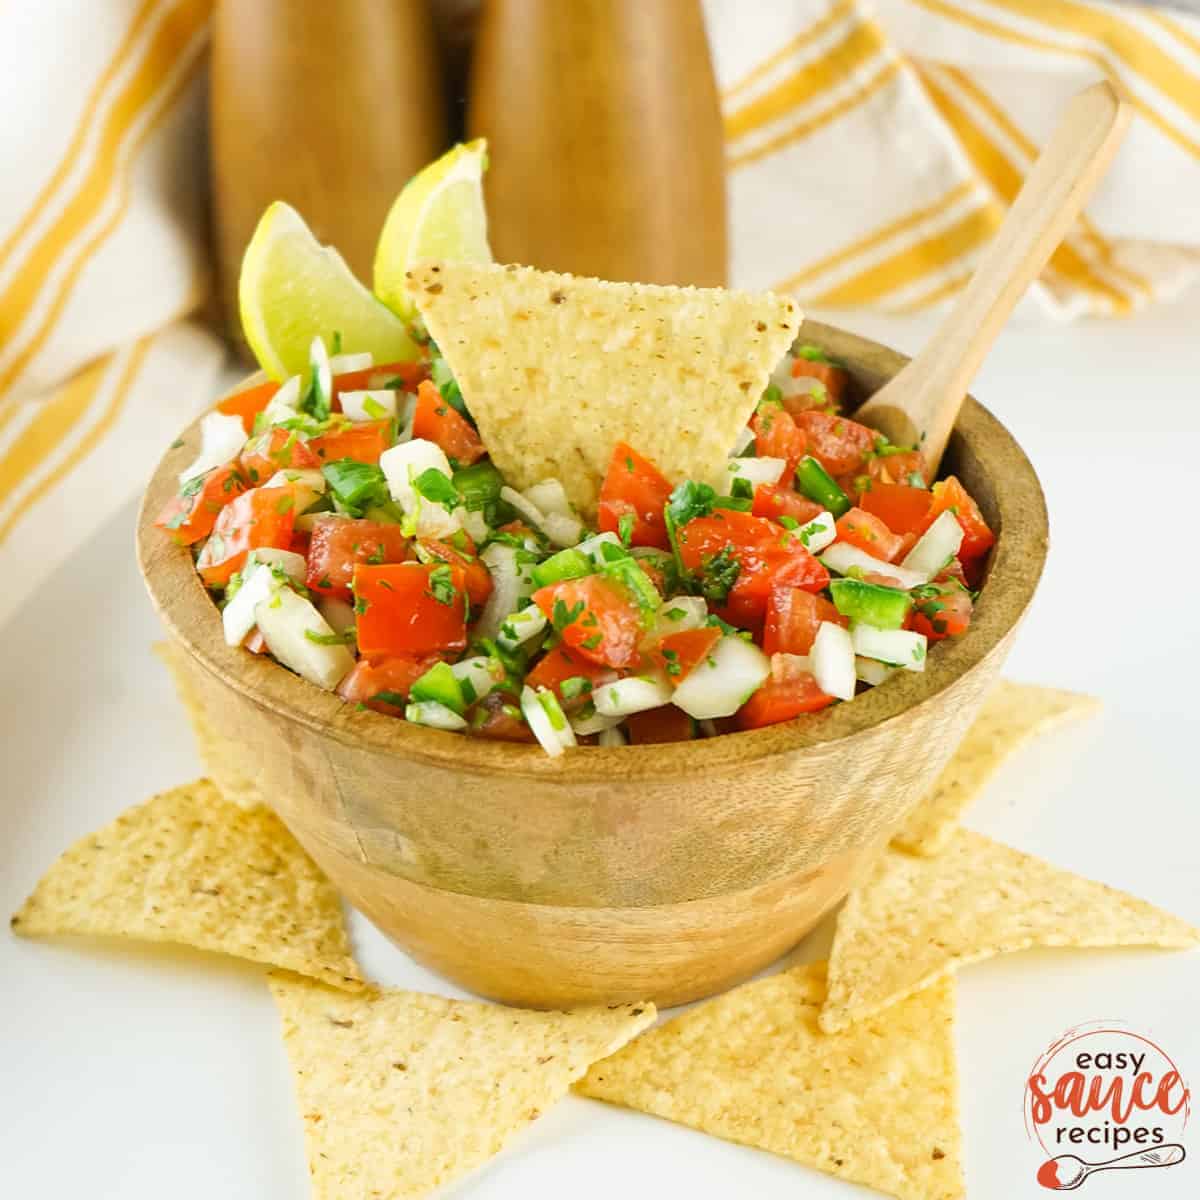 pico de gallo in a brown bowl with tortillas chips and slices of limes